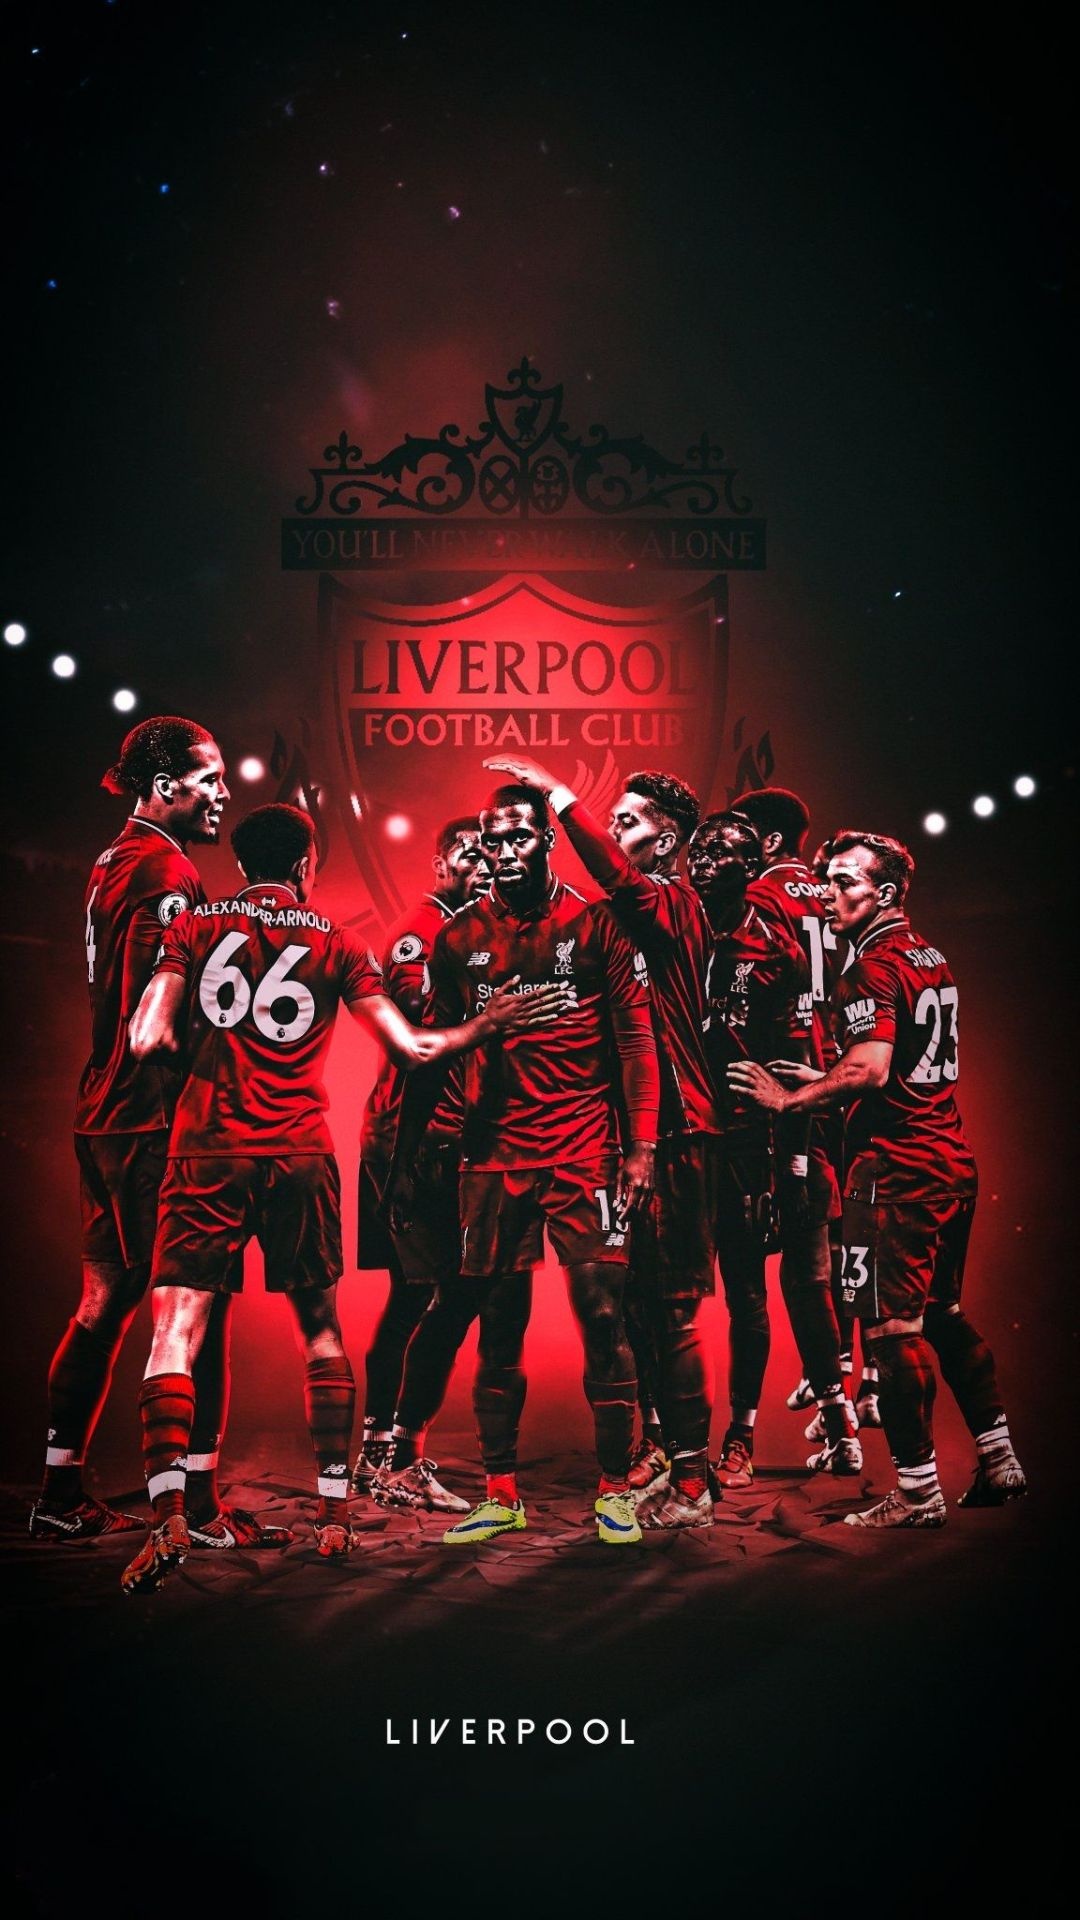 Liverpool Football Club: Liverpool's first league match was against Middlesbrough Ironopolis on 2 September 1893. 1080x1920 Full HD Background.